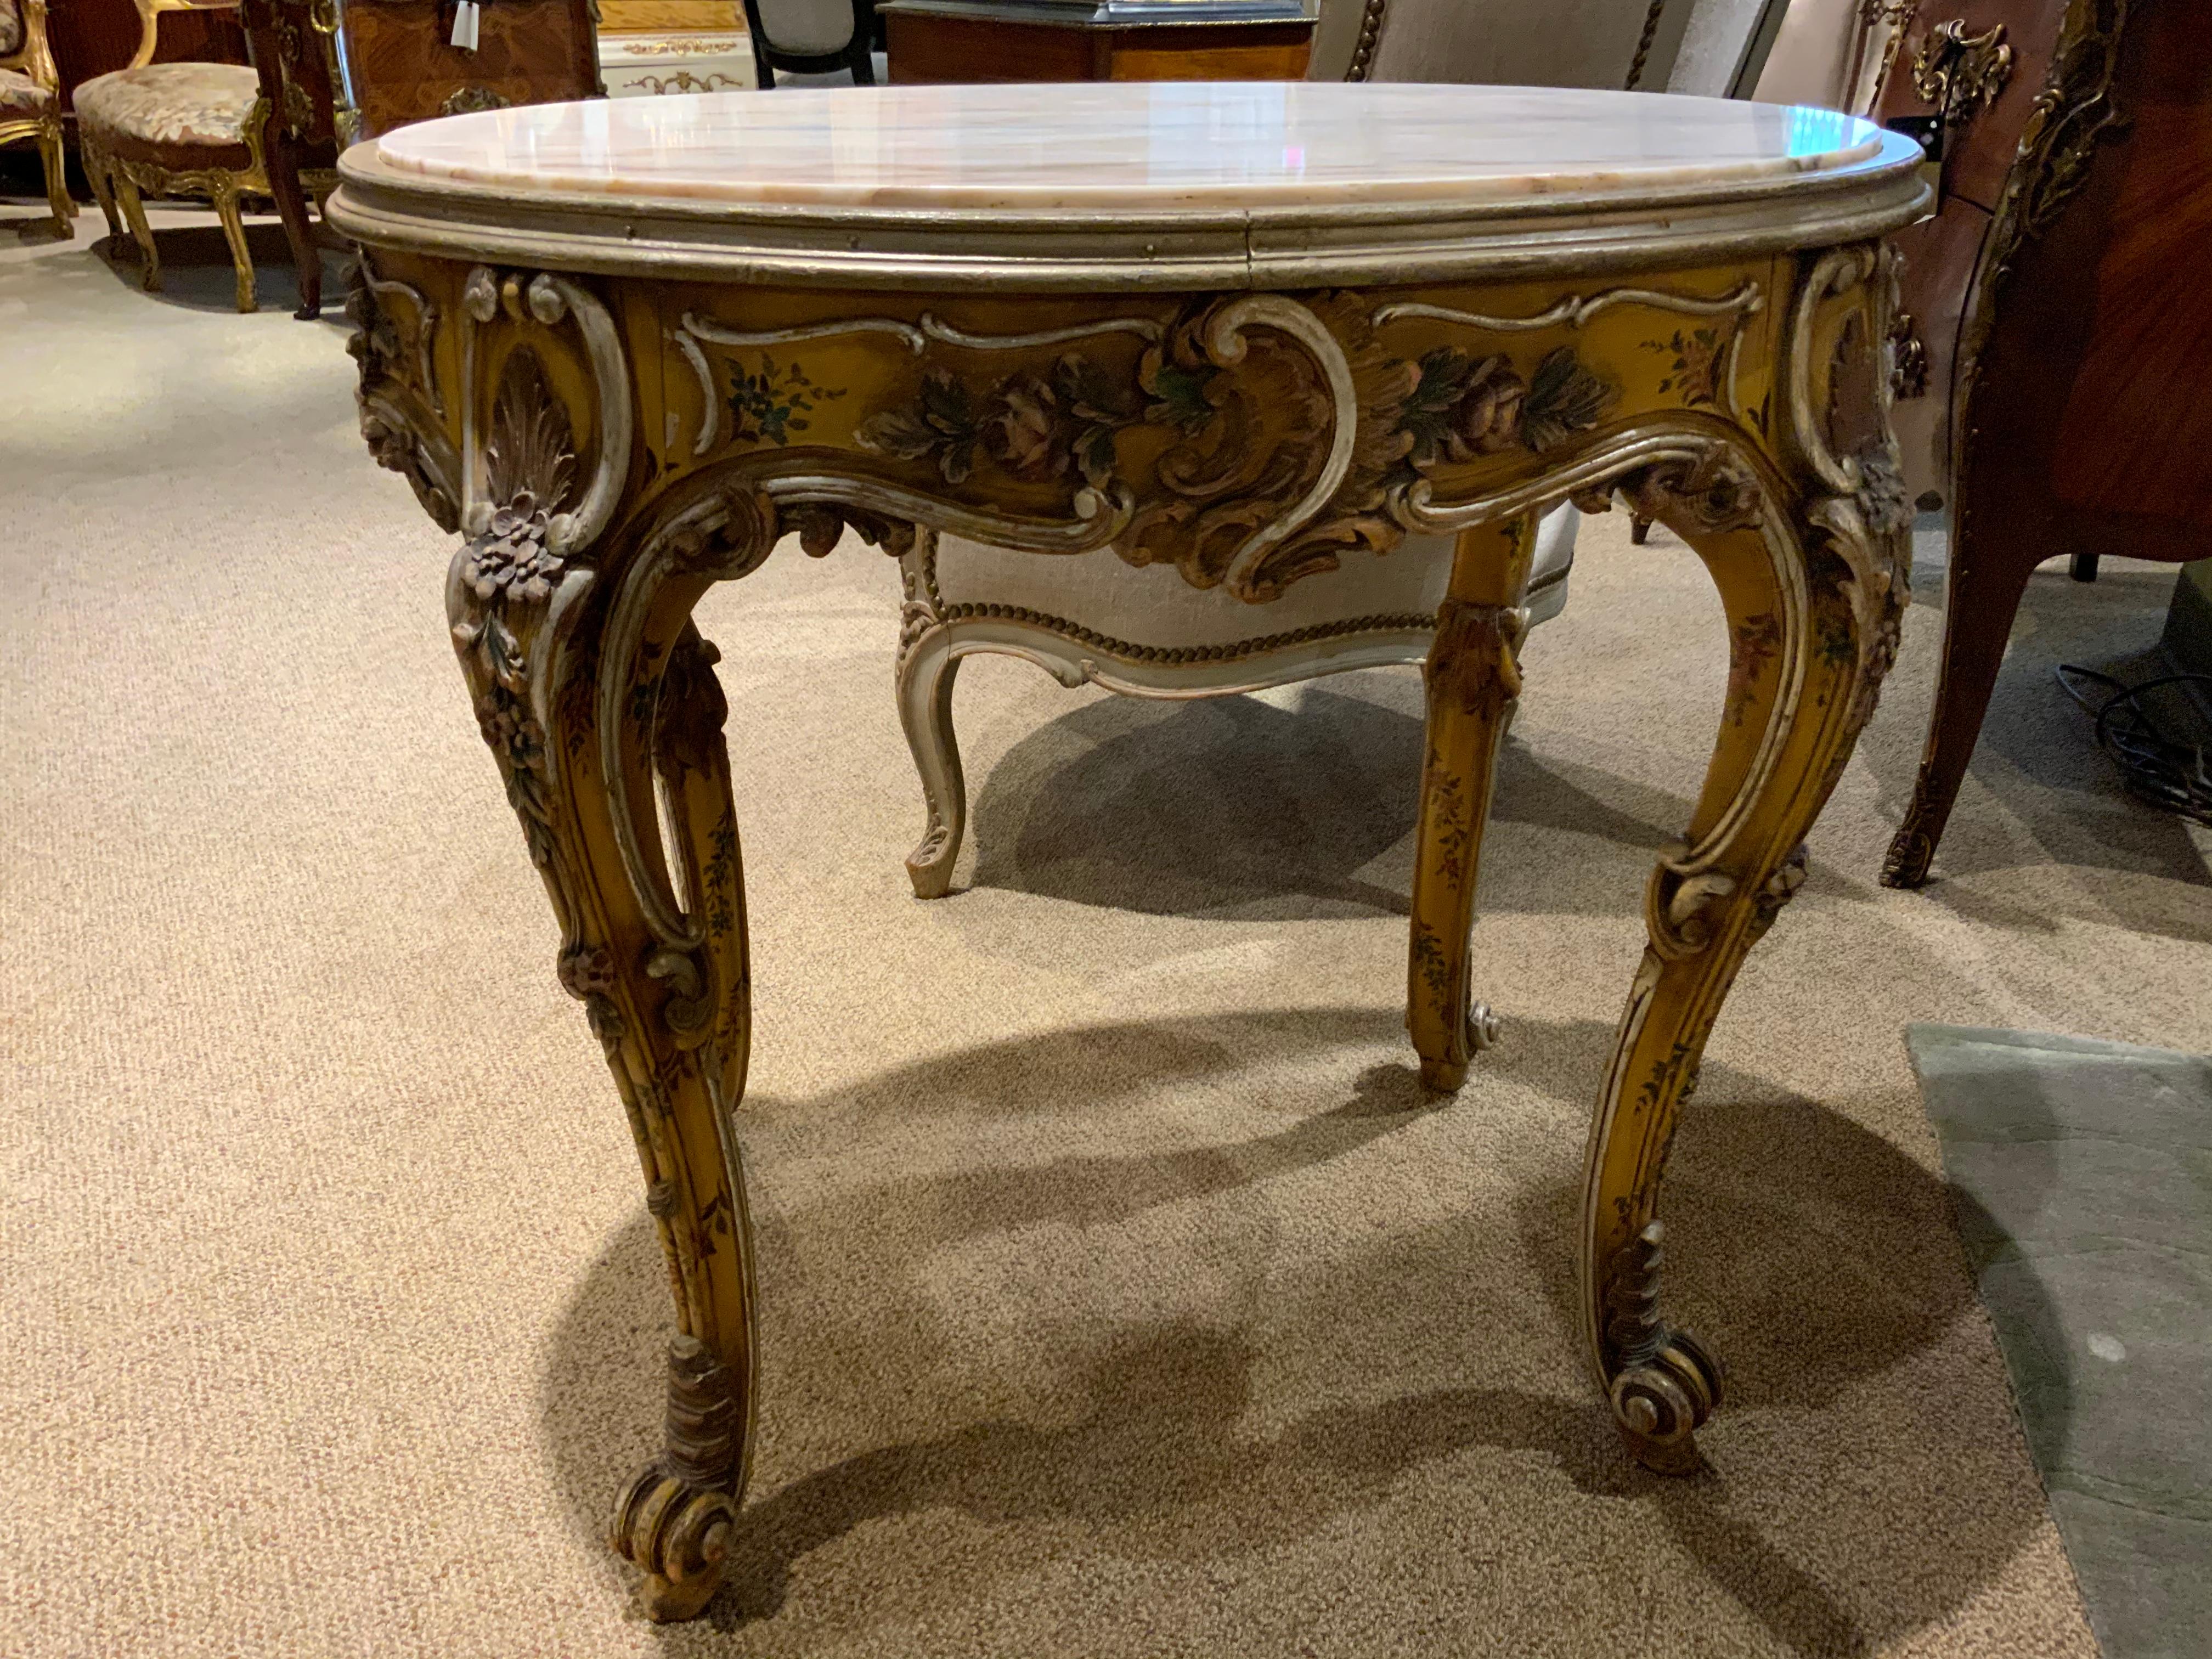 Oval Venetian Carved and Polychrome Table with a Cream, Gold and Pale Gray Veins For Sale 1